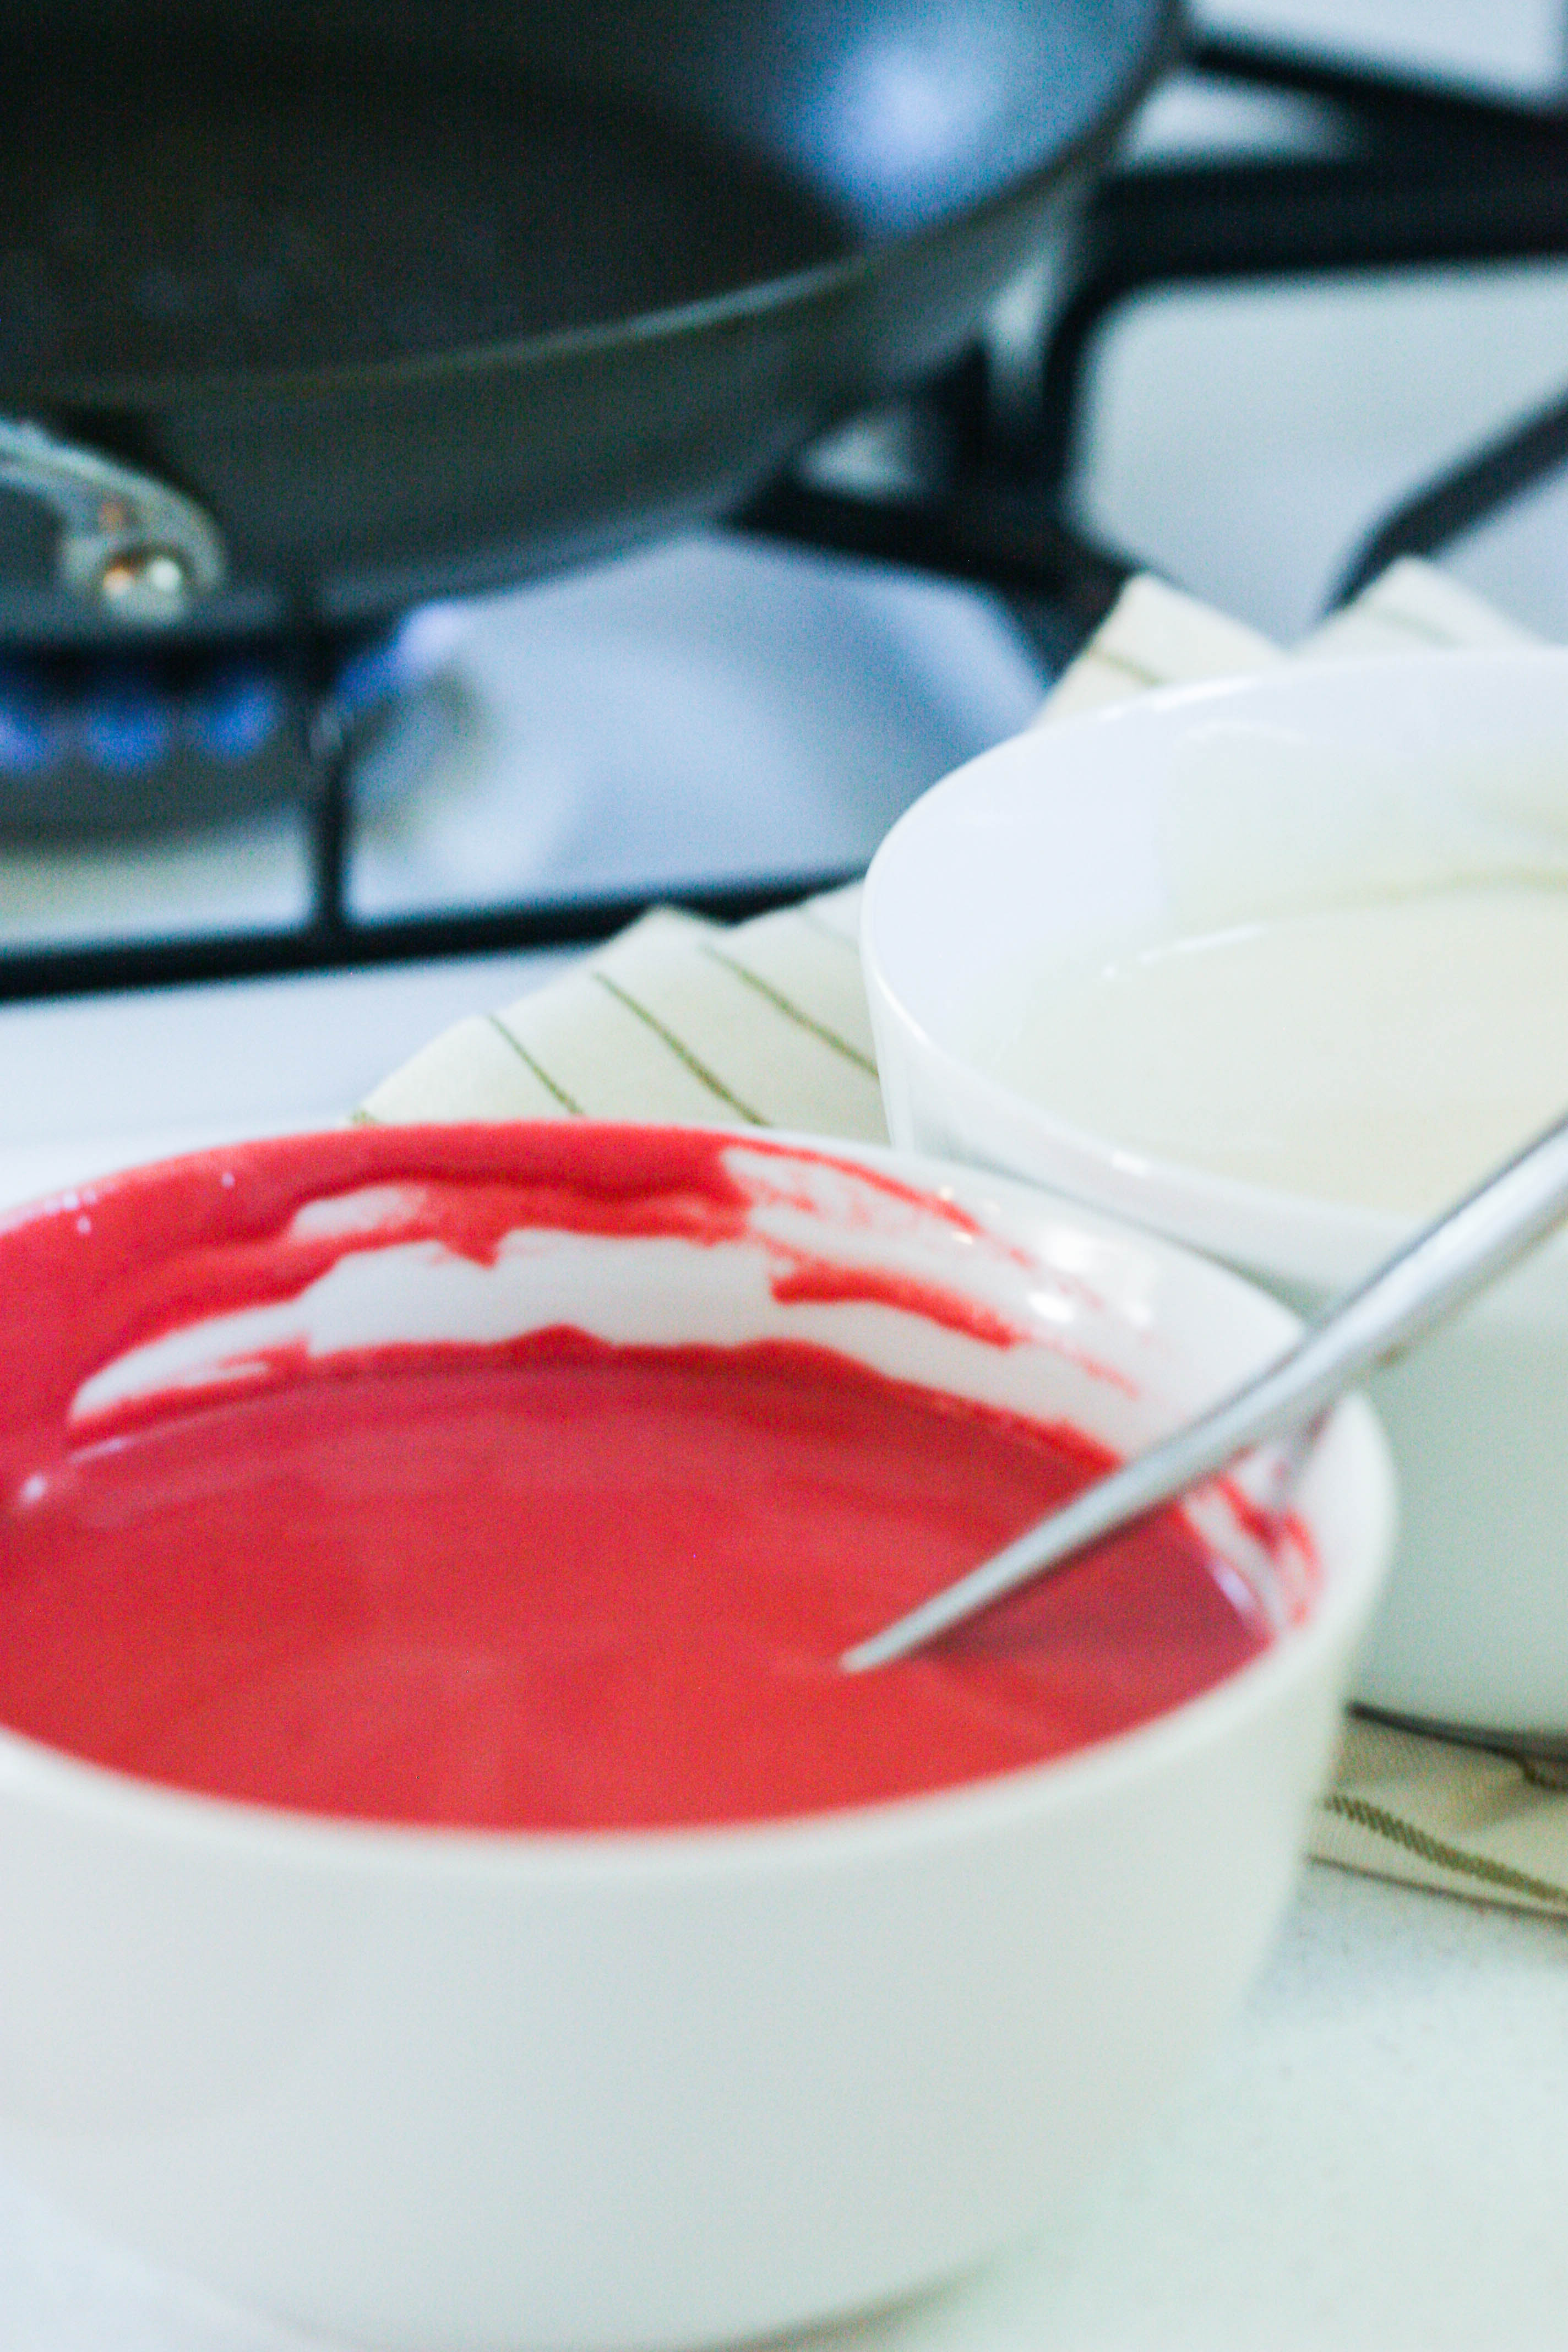 Red crepe batter in a mixing bowl